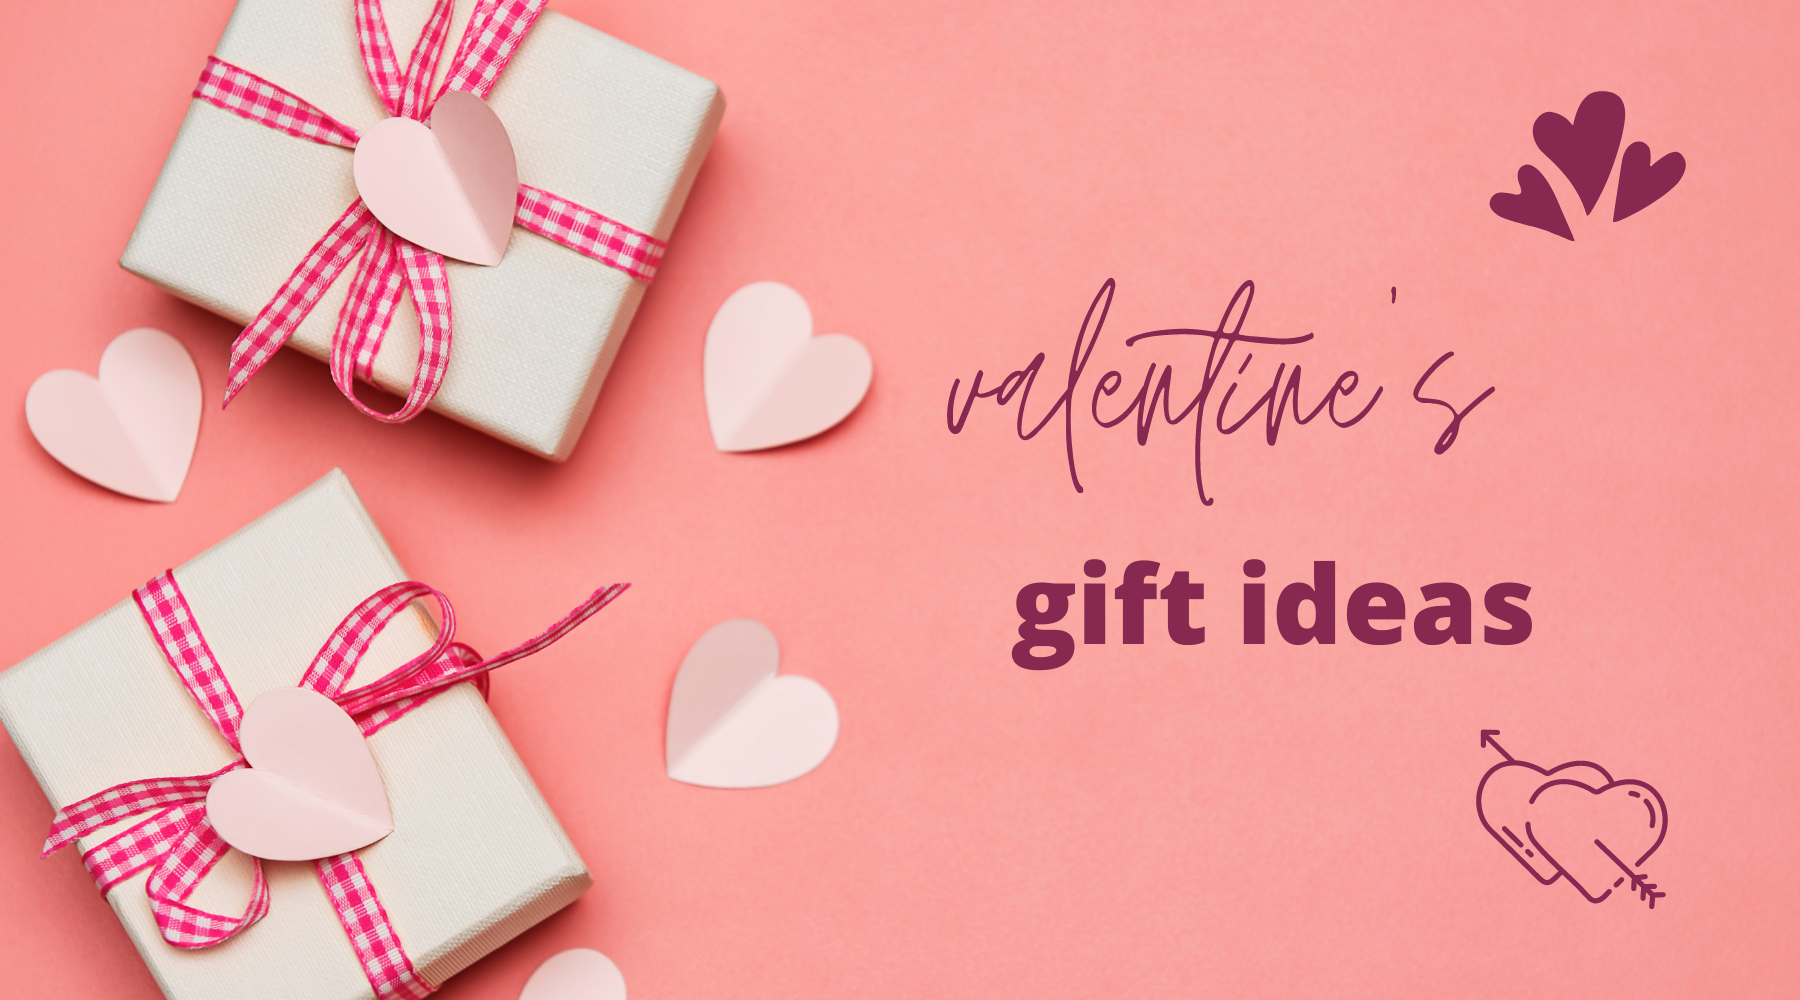 Top Valentine's Gift Ideas for him or her